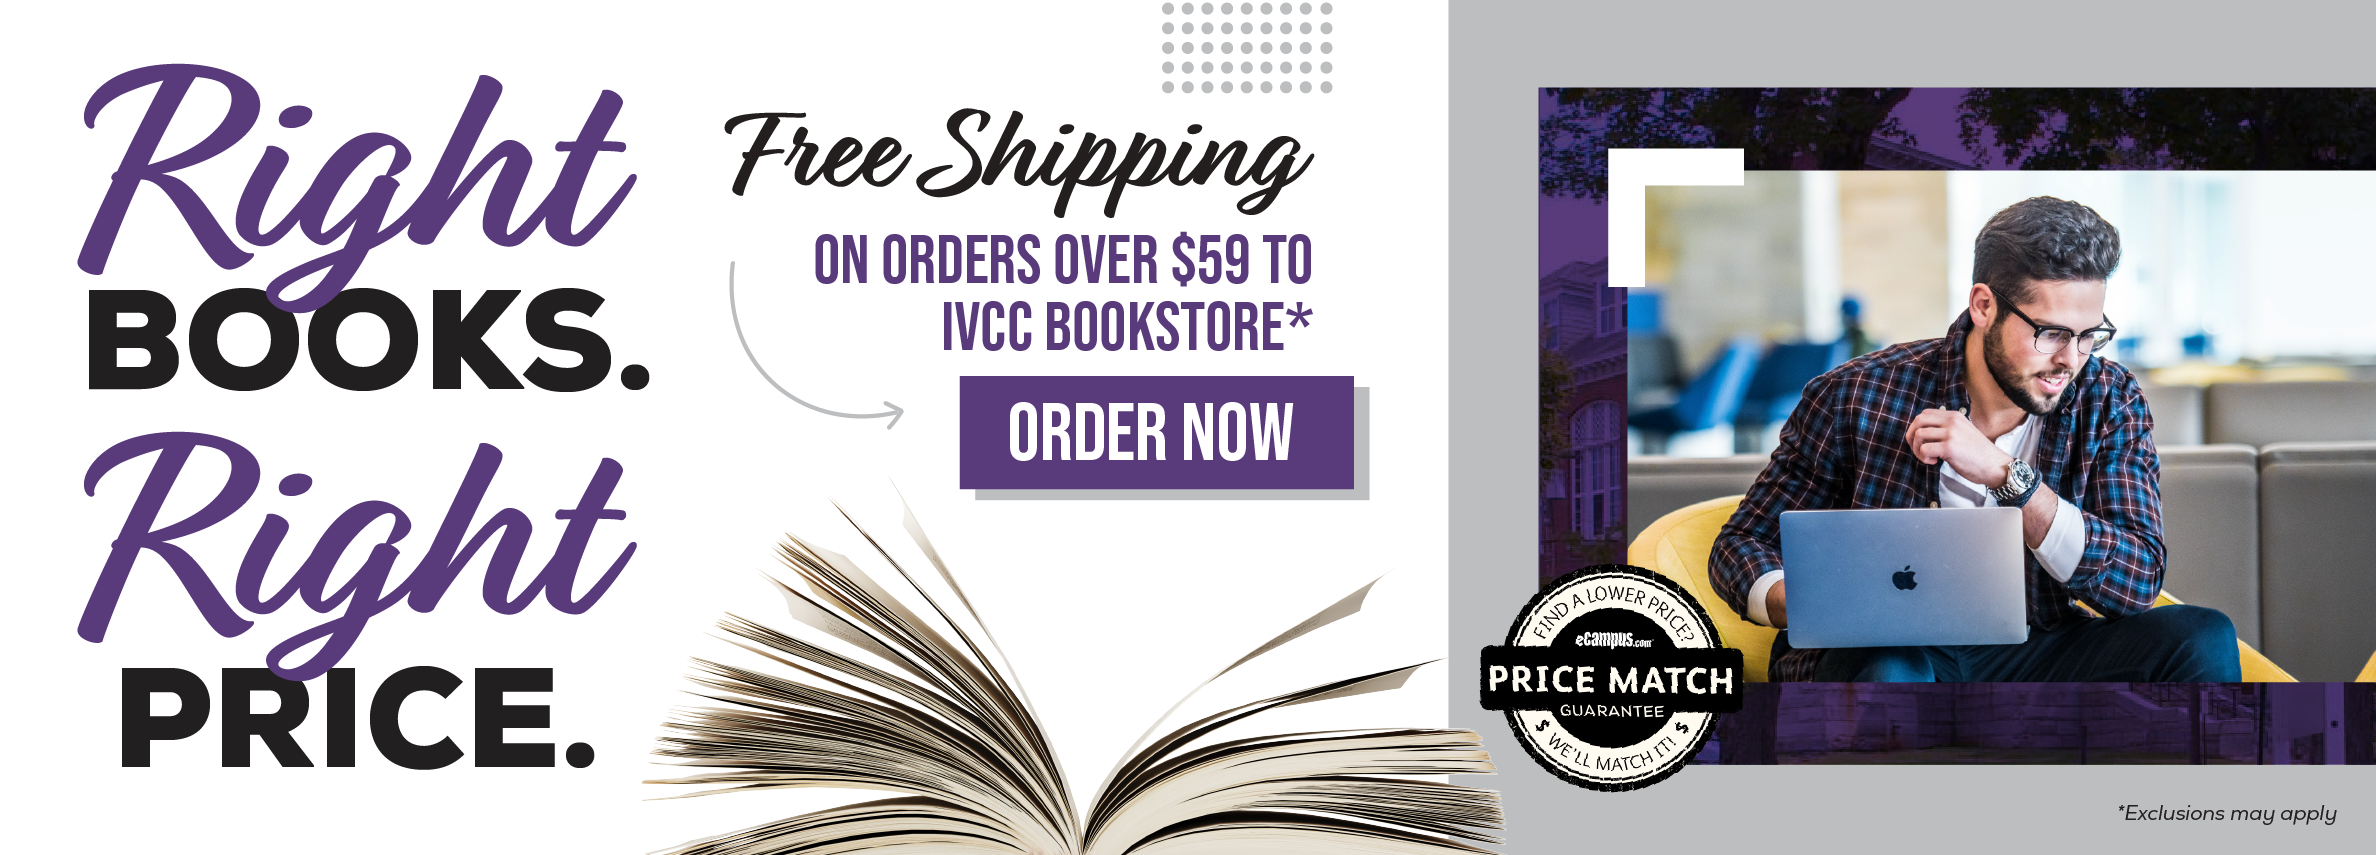 Right books. Right price. Free shipping on orders over $59 to IVCC Bookstore.* Order now. Price Match Guarantee. *Exclusions may apply.